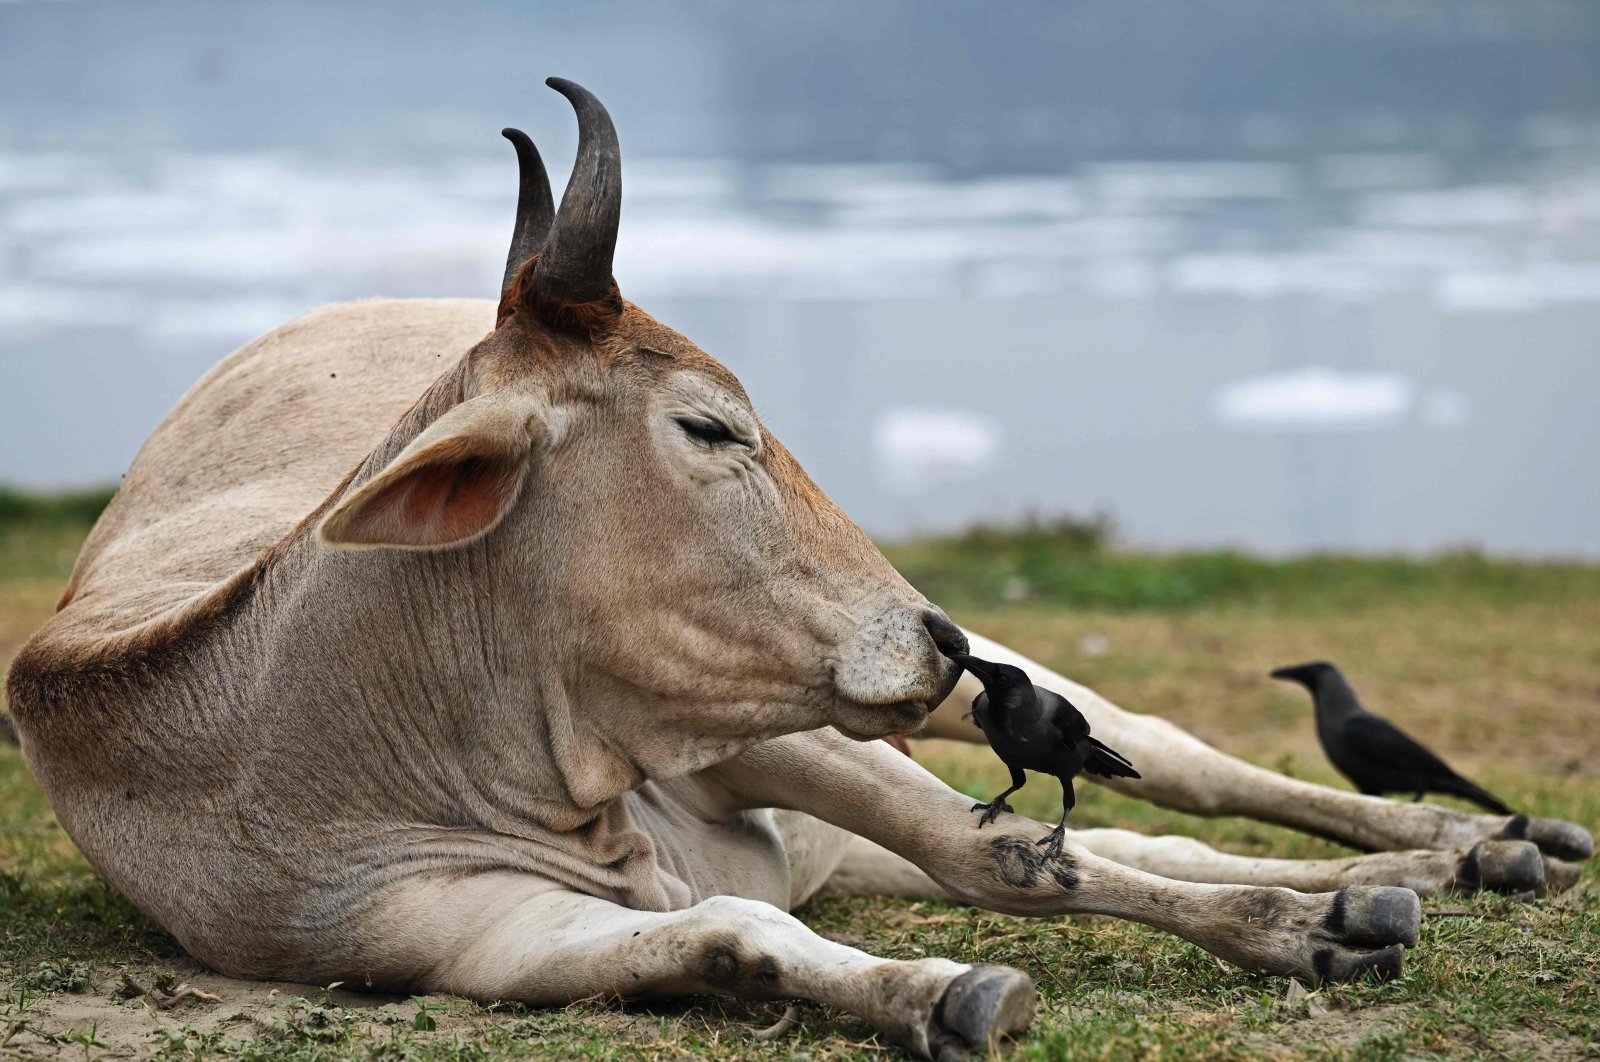 A crow sits on a cow in New Delhi, India, Dec. 26, 2021. (AFP Photo)